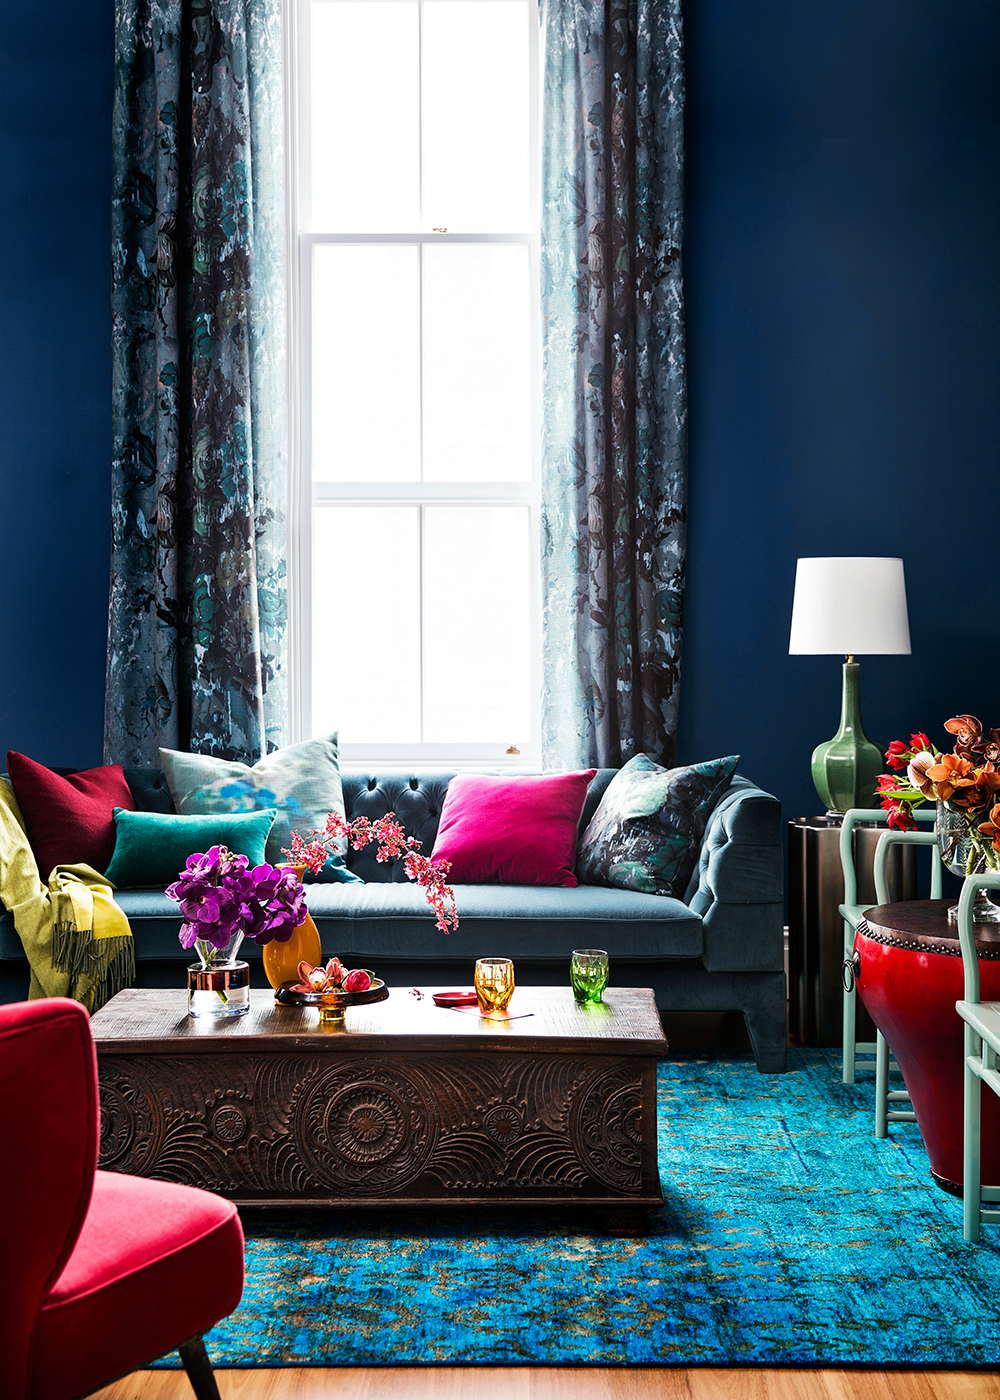 Contemporary living room walls painted in Dulux Passionate Blue. Via Home Beautiful